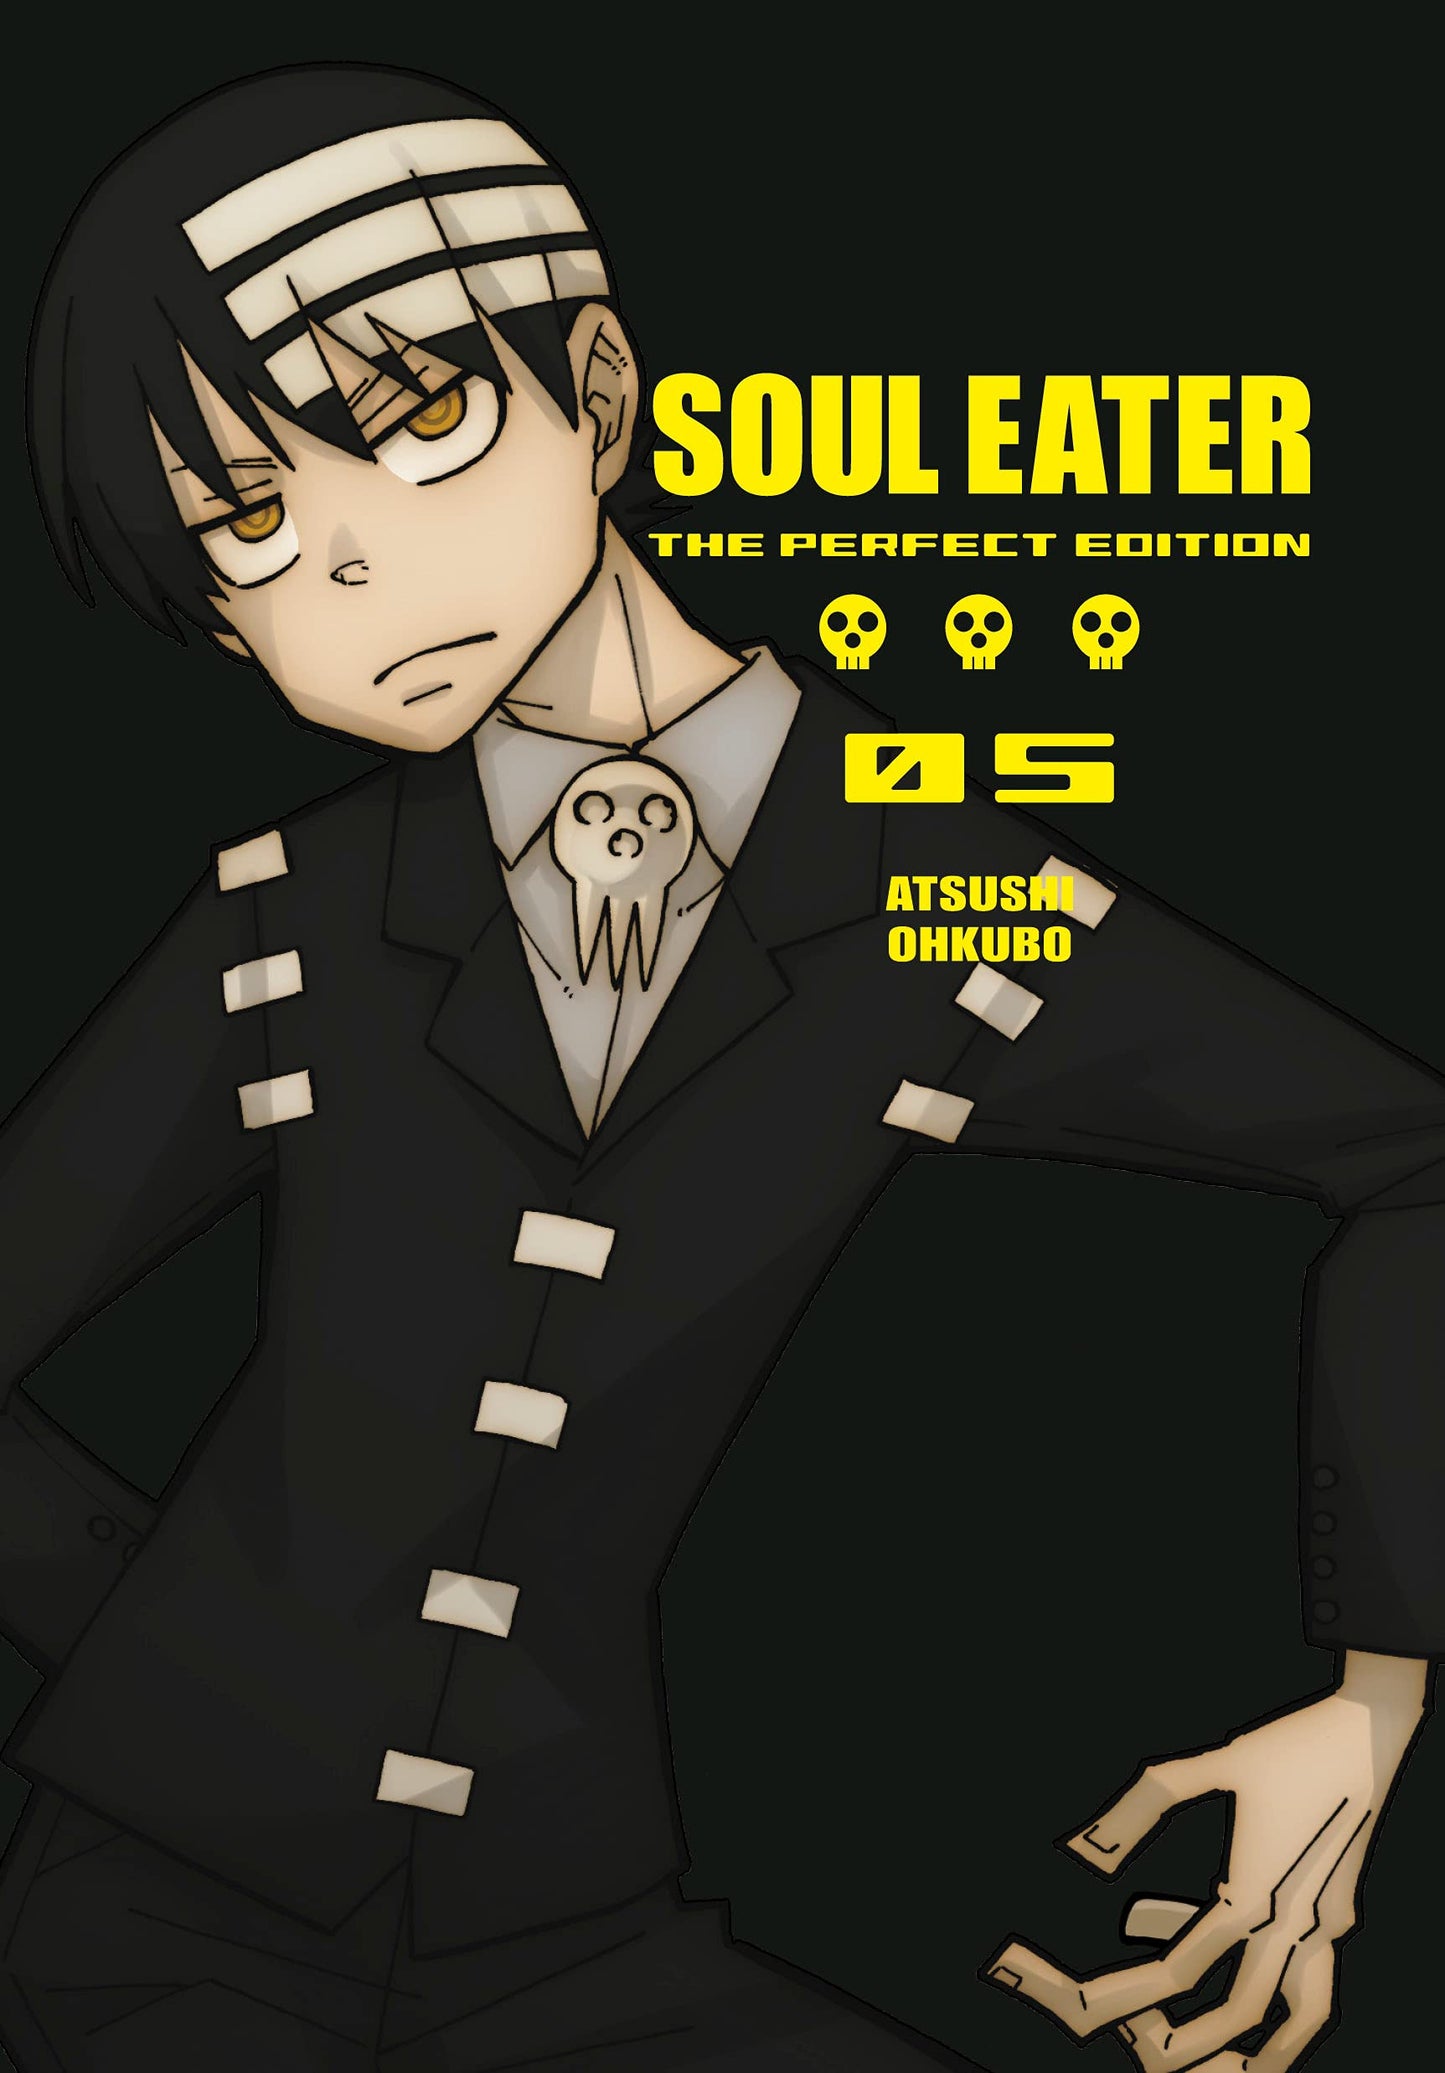 SOUL EATER THE PERFECT EDITION VOLUME 05